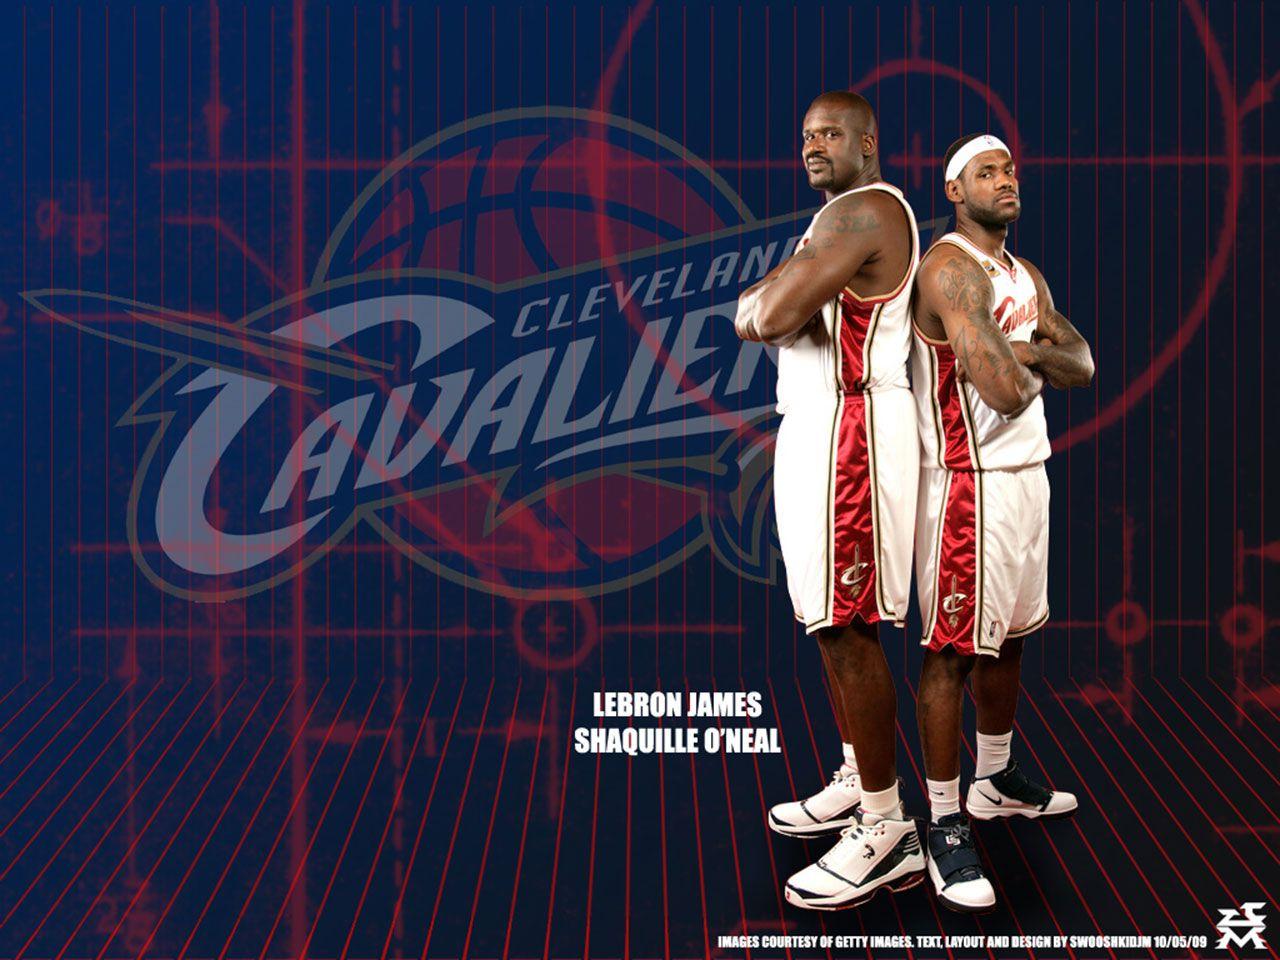 Shaquille ONeal SHAQ Wallpaper by PavanPGraphics on DeviantArt